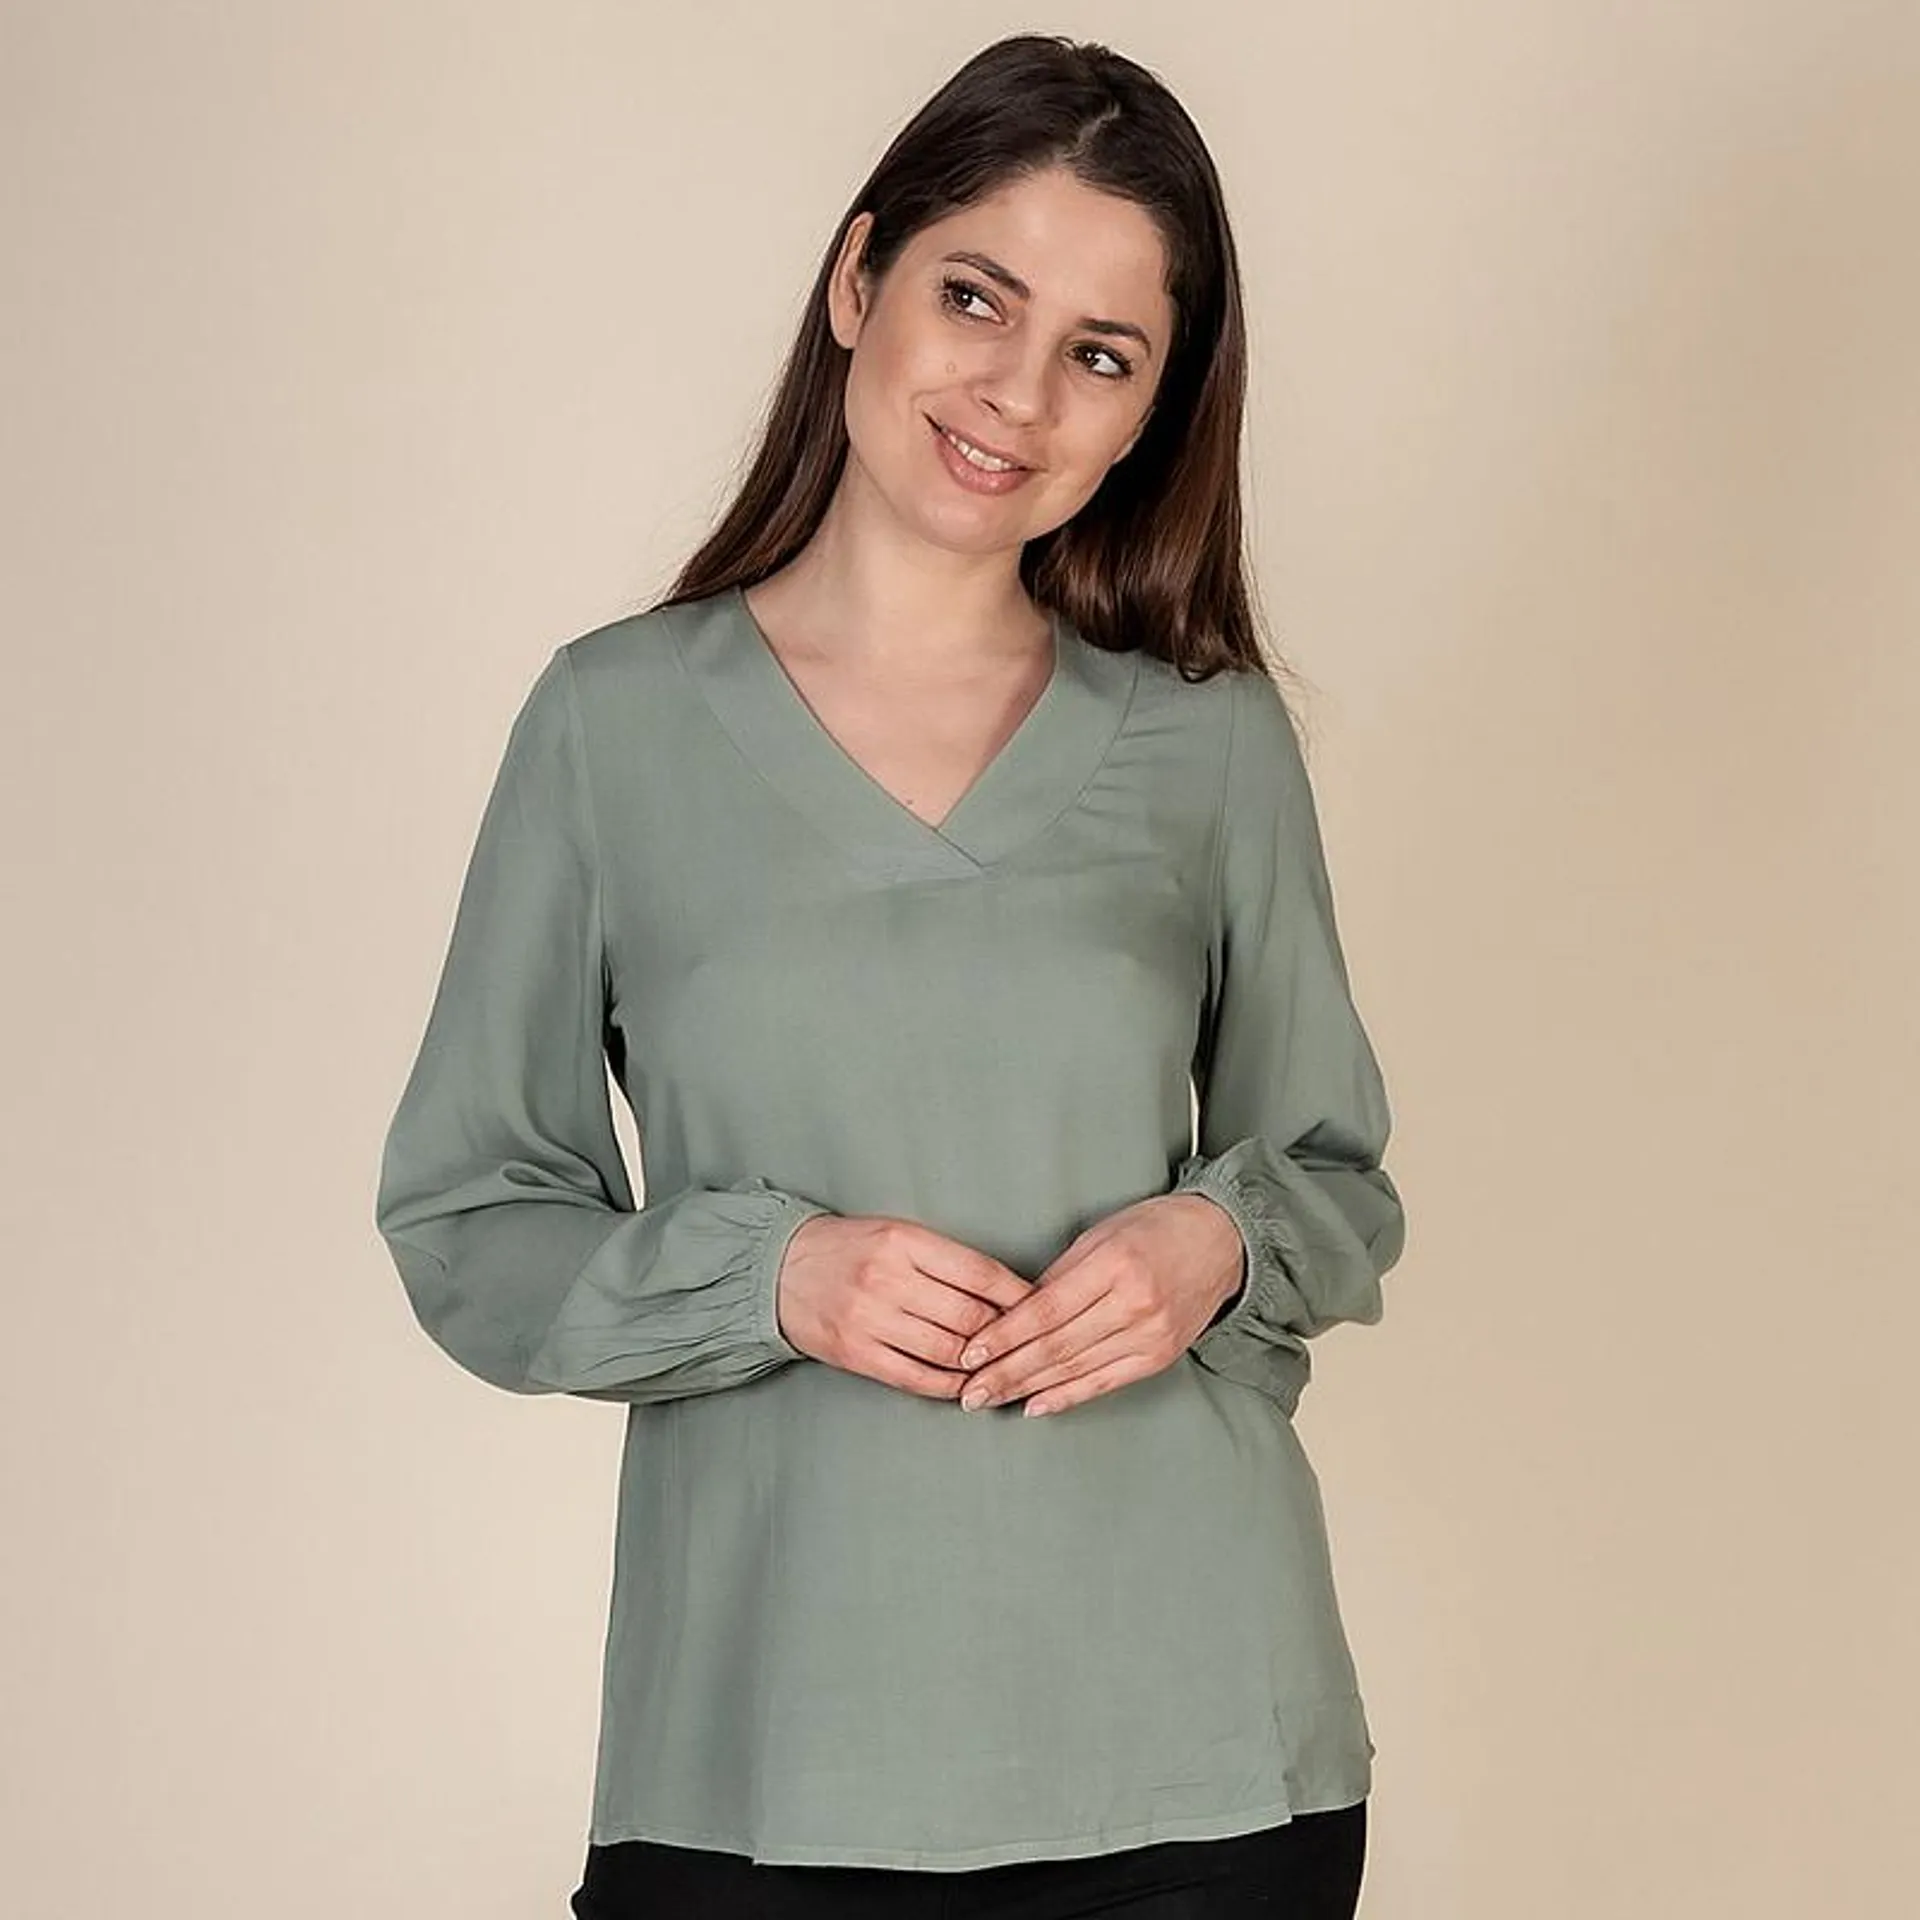 TAMSY Solid V-Neck Women's Top - Mint Green